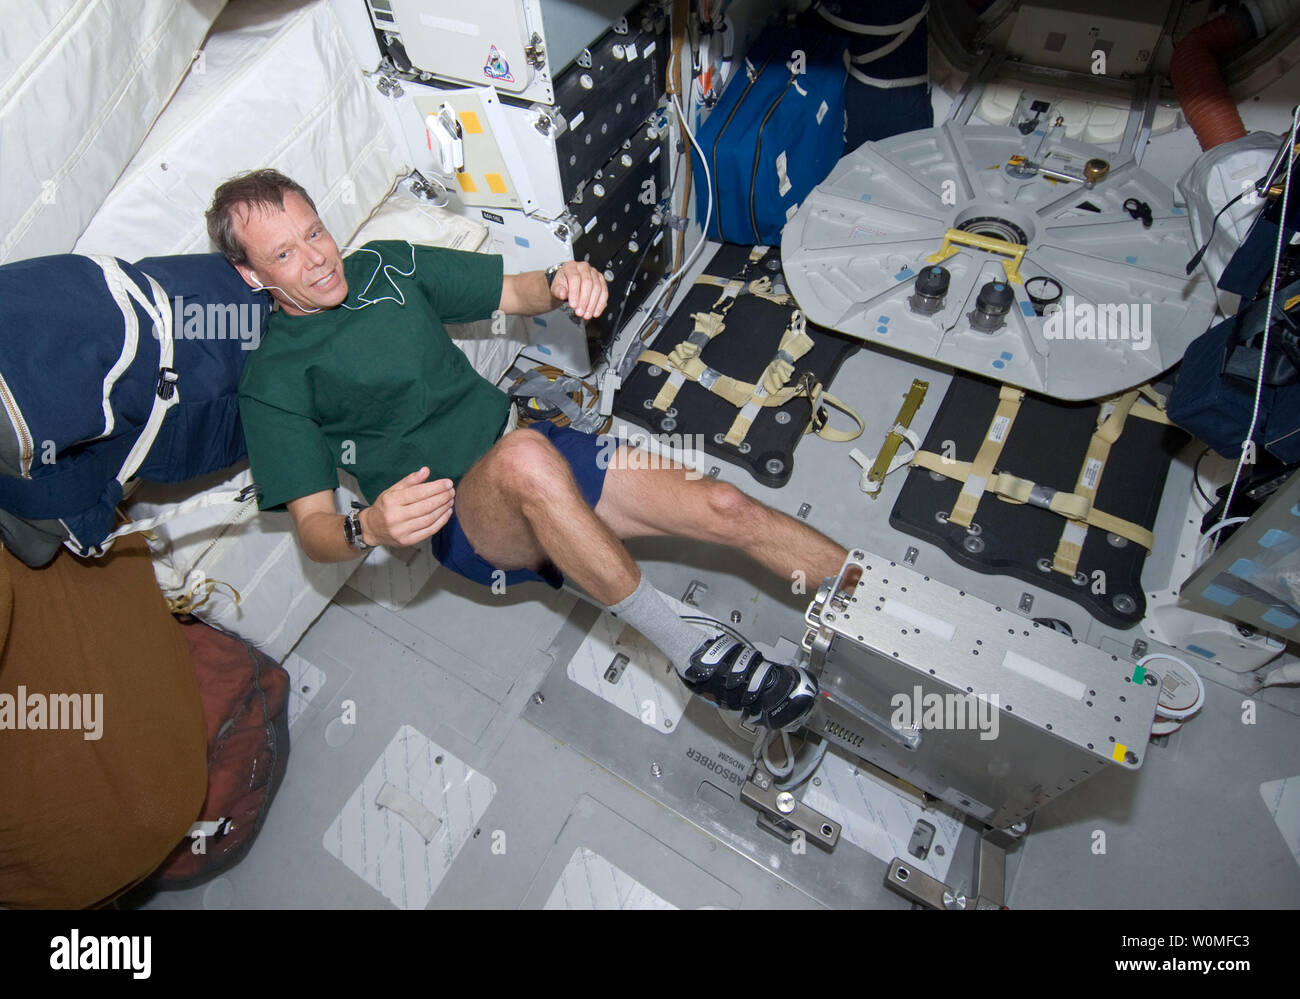 This NASA image taken by astronauts aboard Space Shuttle Discovery on mission STS-128 shows European Space Agency astronaut Christer Fuglesang, STS-128 mission specialist, exercising on a bicycle ergometer on the middeck of the Earth-orbiting Space Shuttle Discovery, August 29, 2009.  UPI/NASA Stock Photo